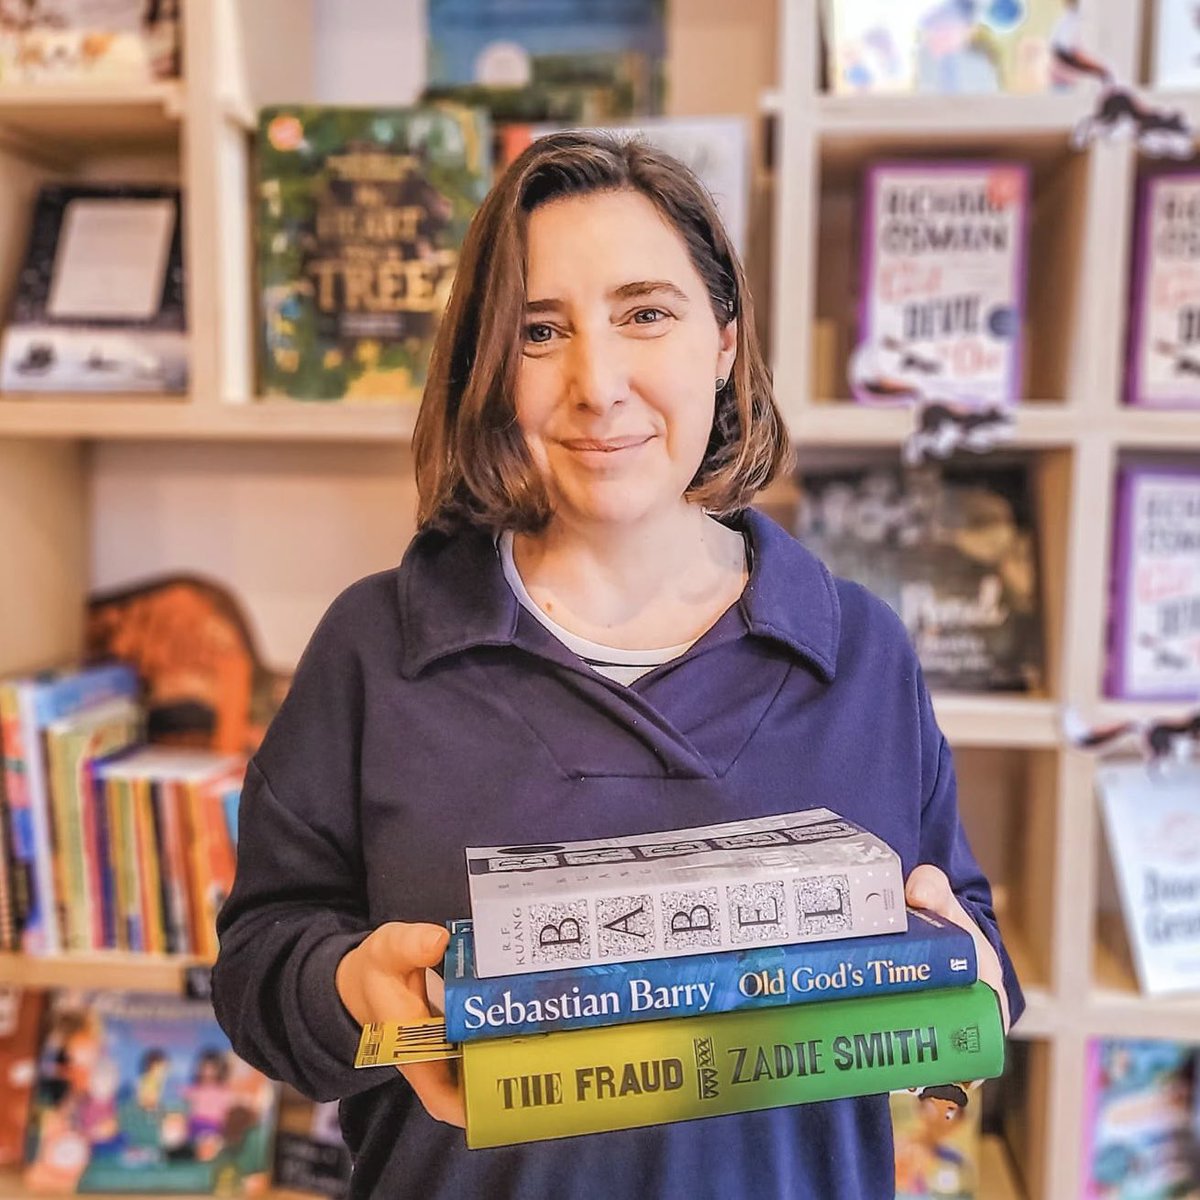 For this week’s #BookshopSpotlight we caught up with @littlebookshops co-owner and manager Cheryl Duffield to find out about their little bookselling corner of the world!

Watch this space for the full interview coming later this week!